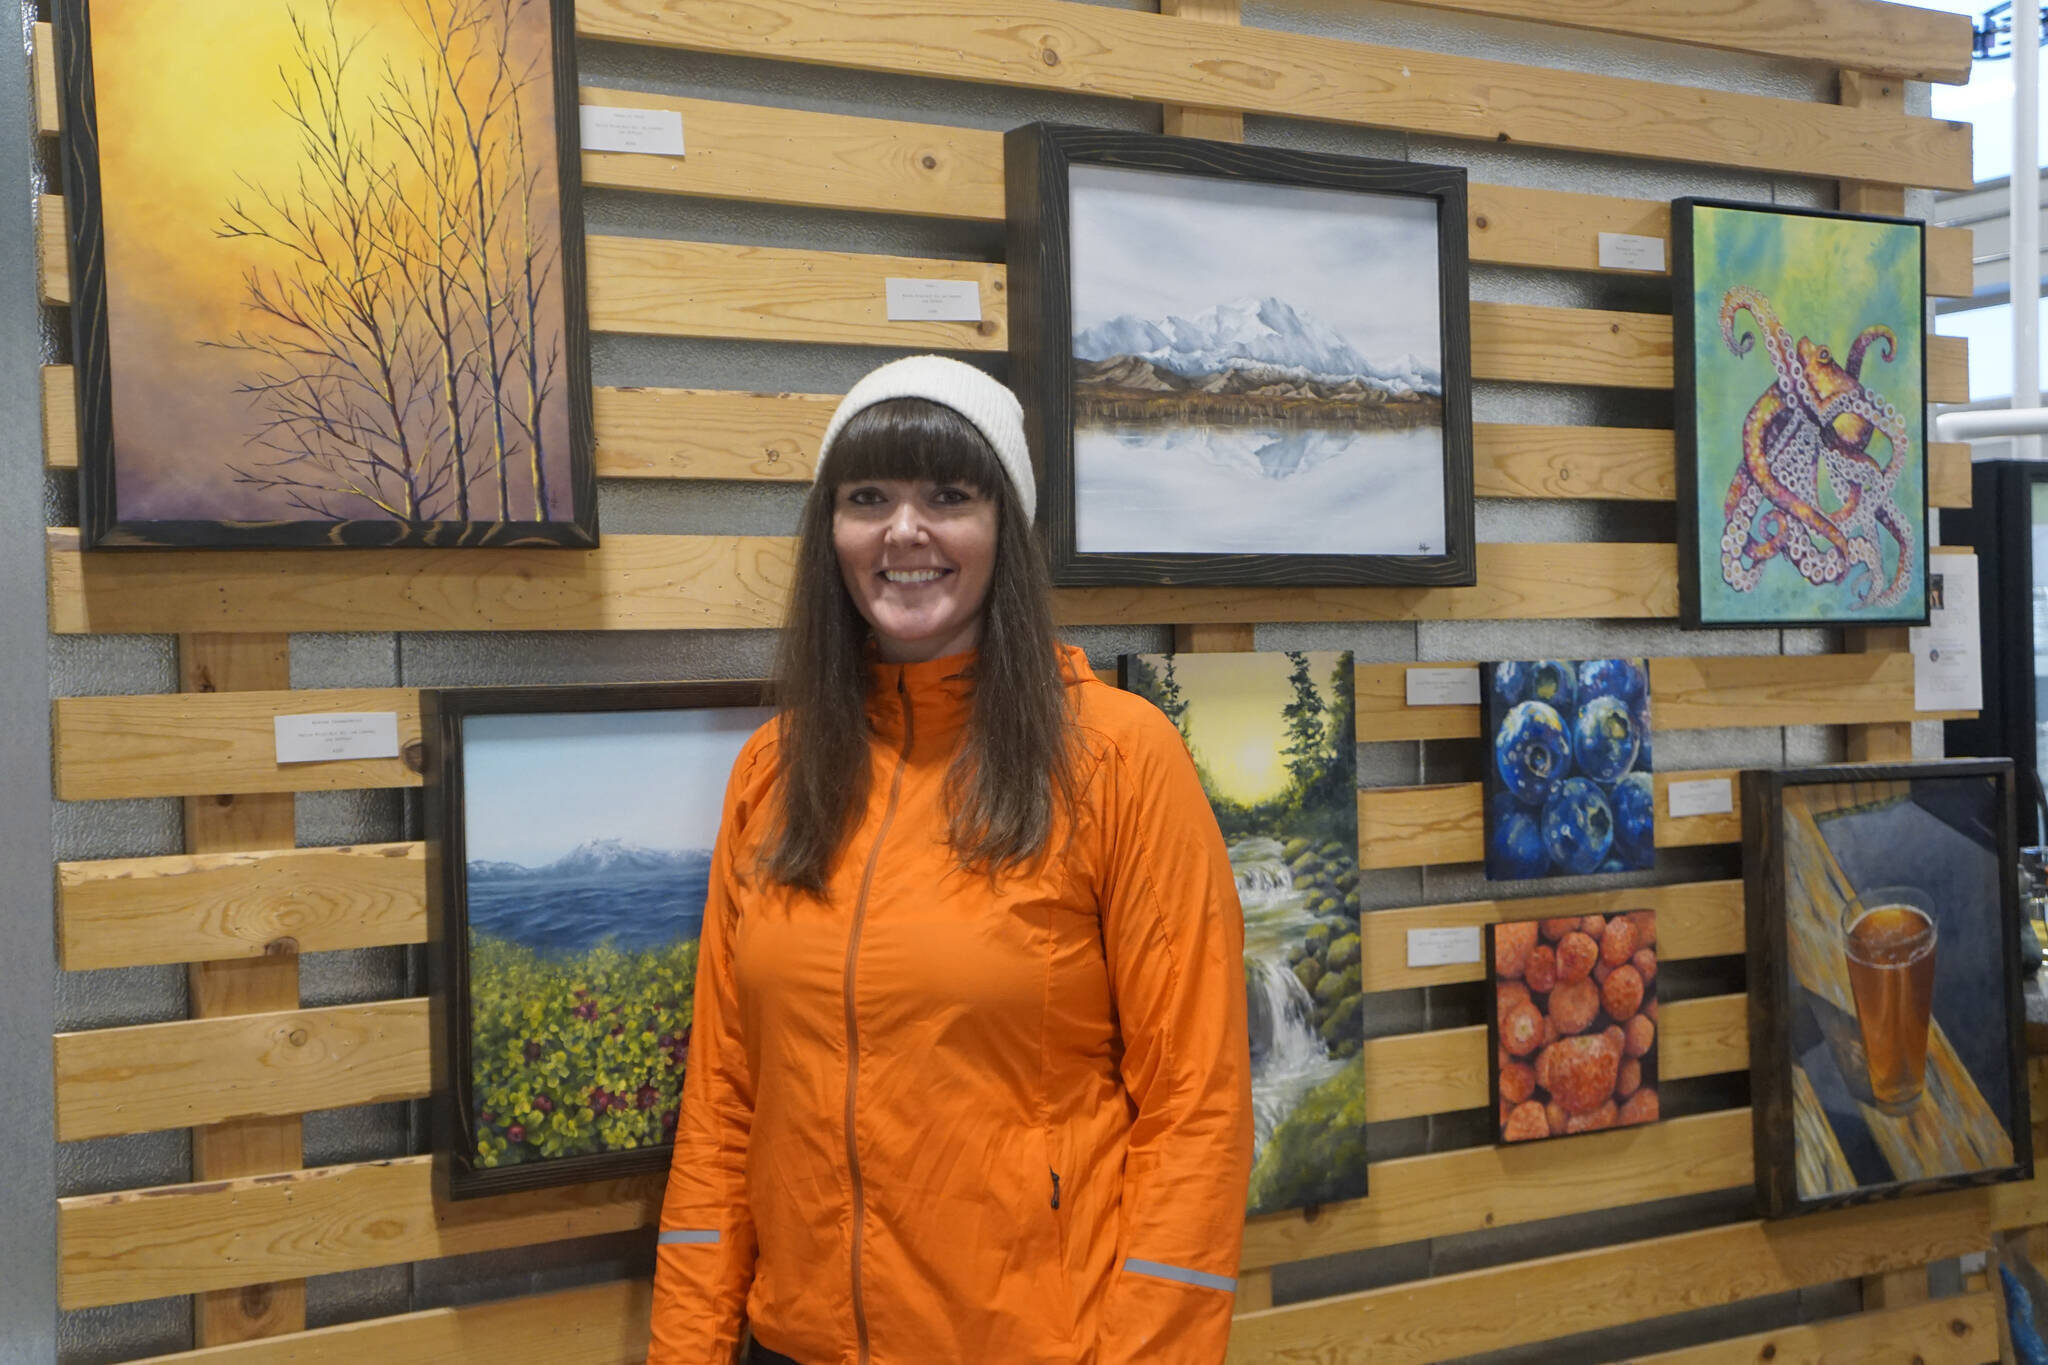 Photo by Michael Armstrong
Jen DePesa with her art on display at Grace Ridge Brewing, May 2022.